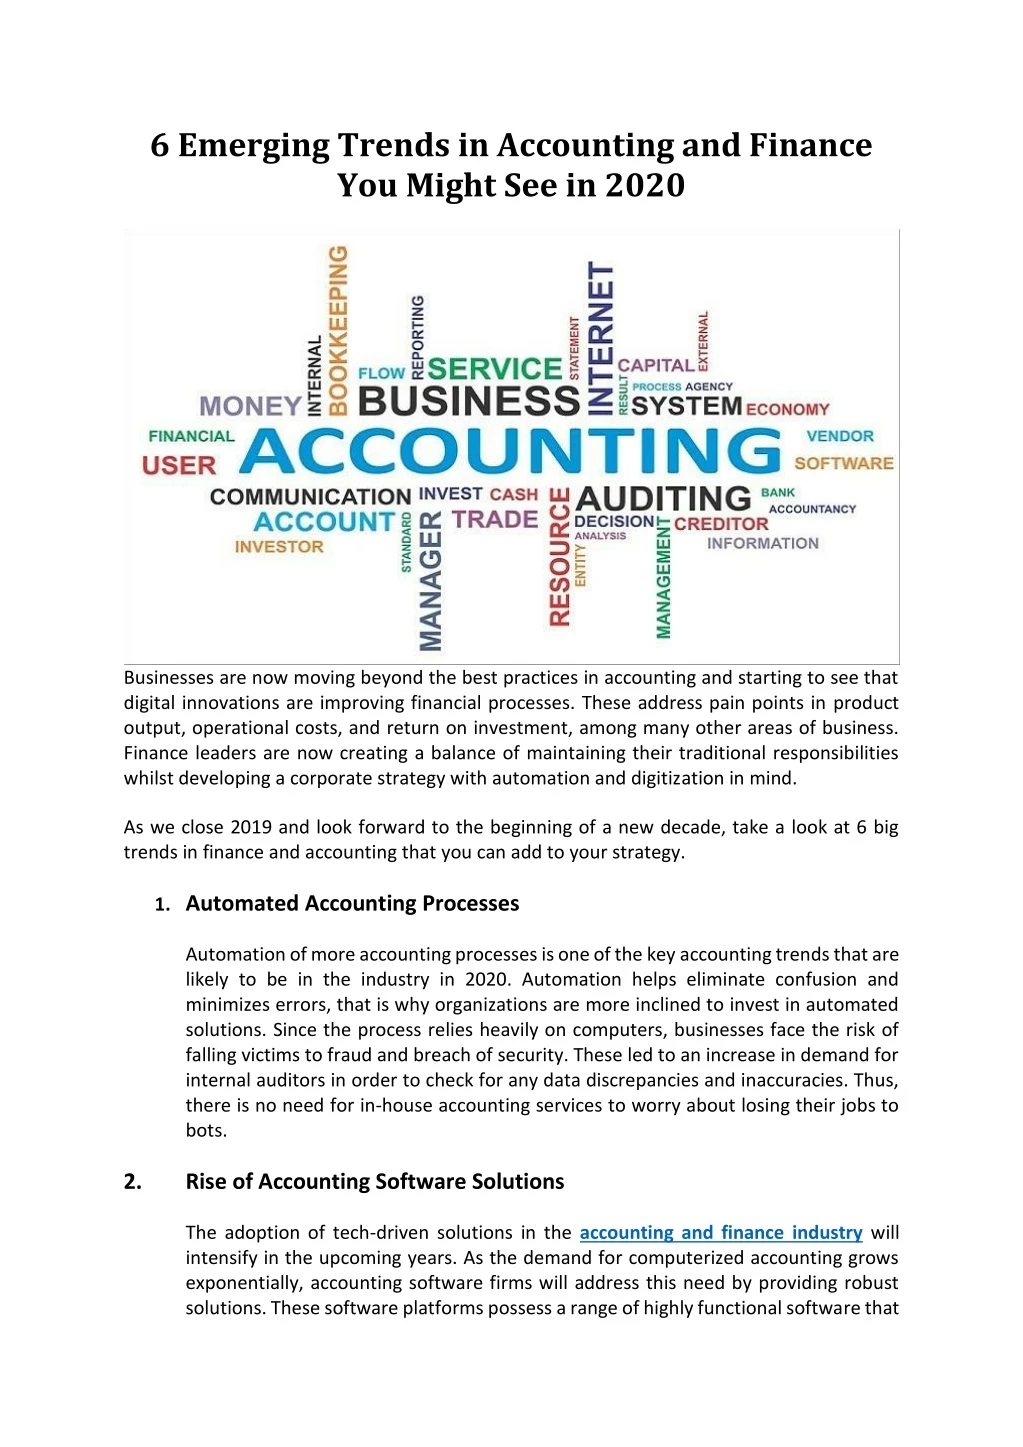 6 emerging trends in accounting and finance